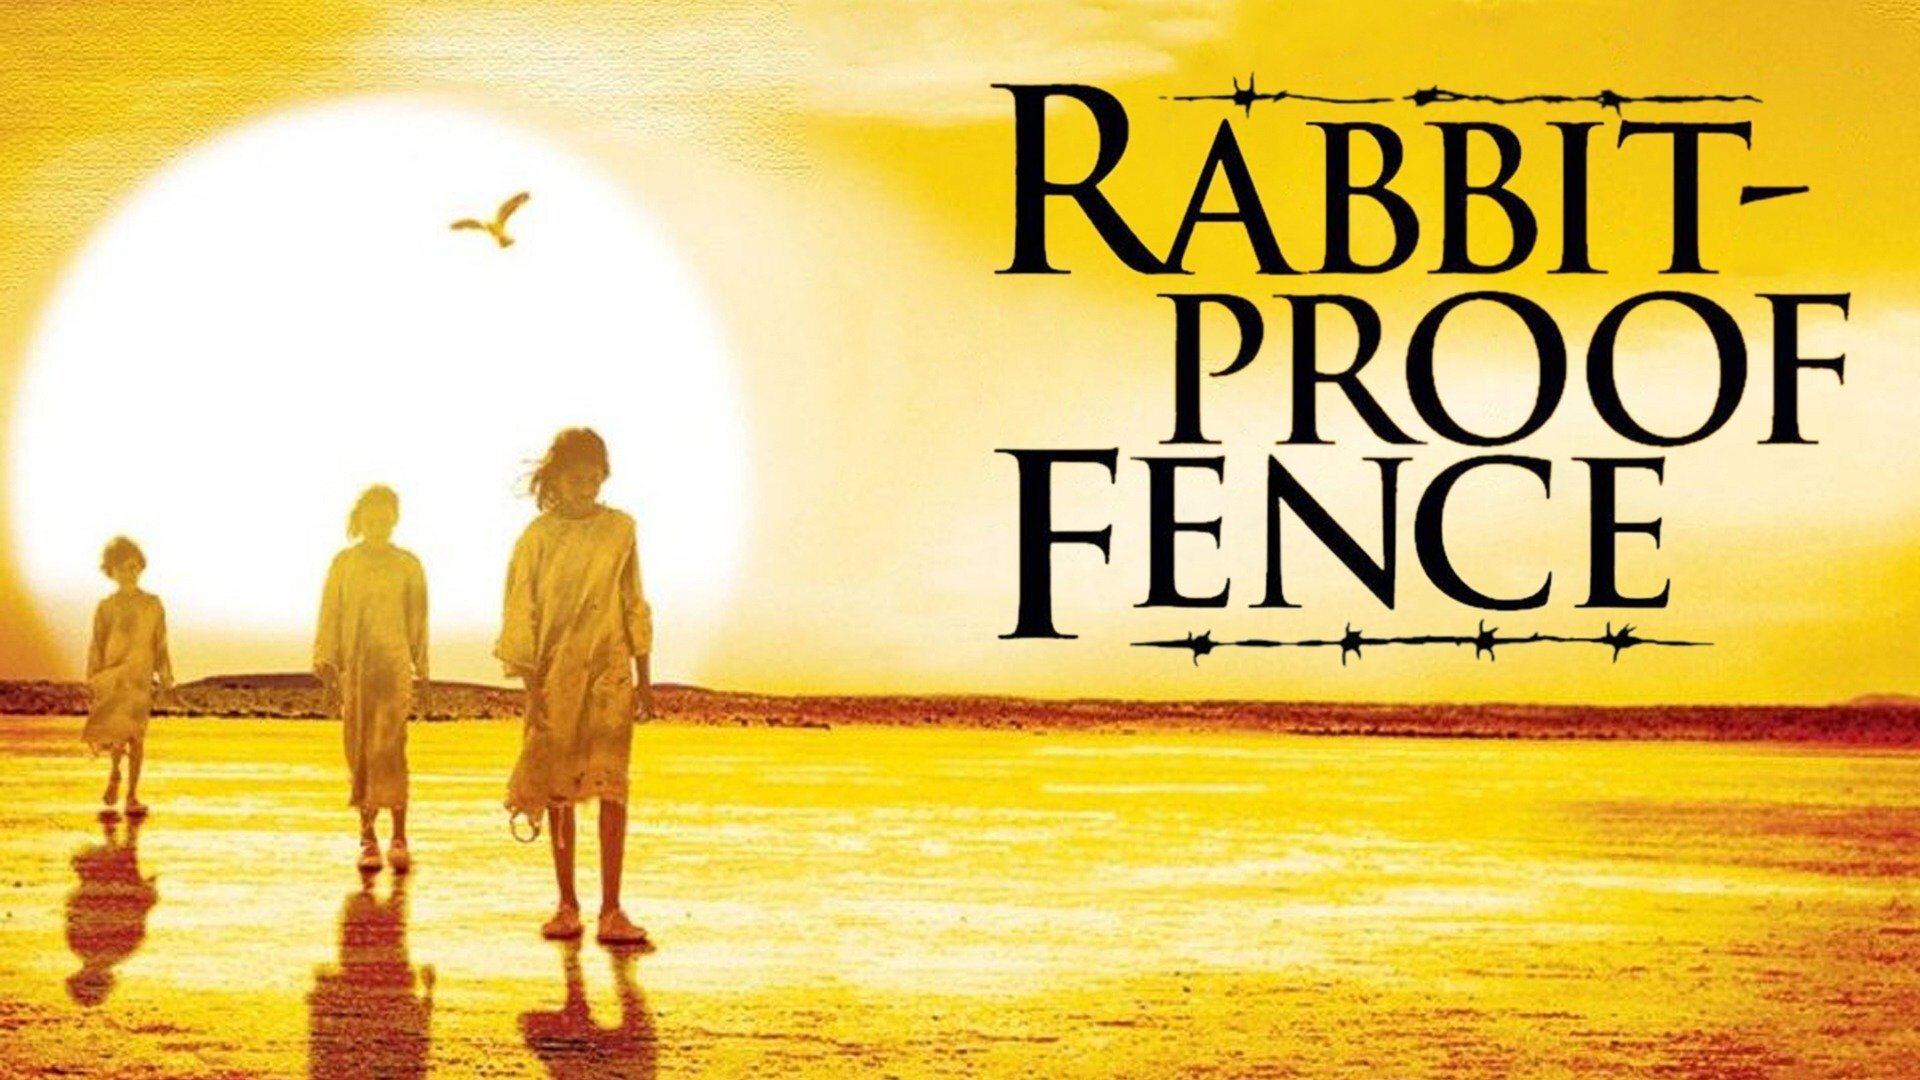 33-facts-about-the-movie-rabbit-proof-fence